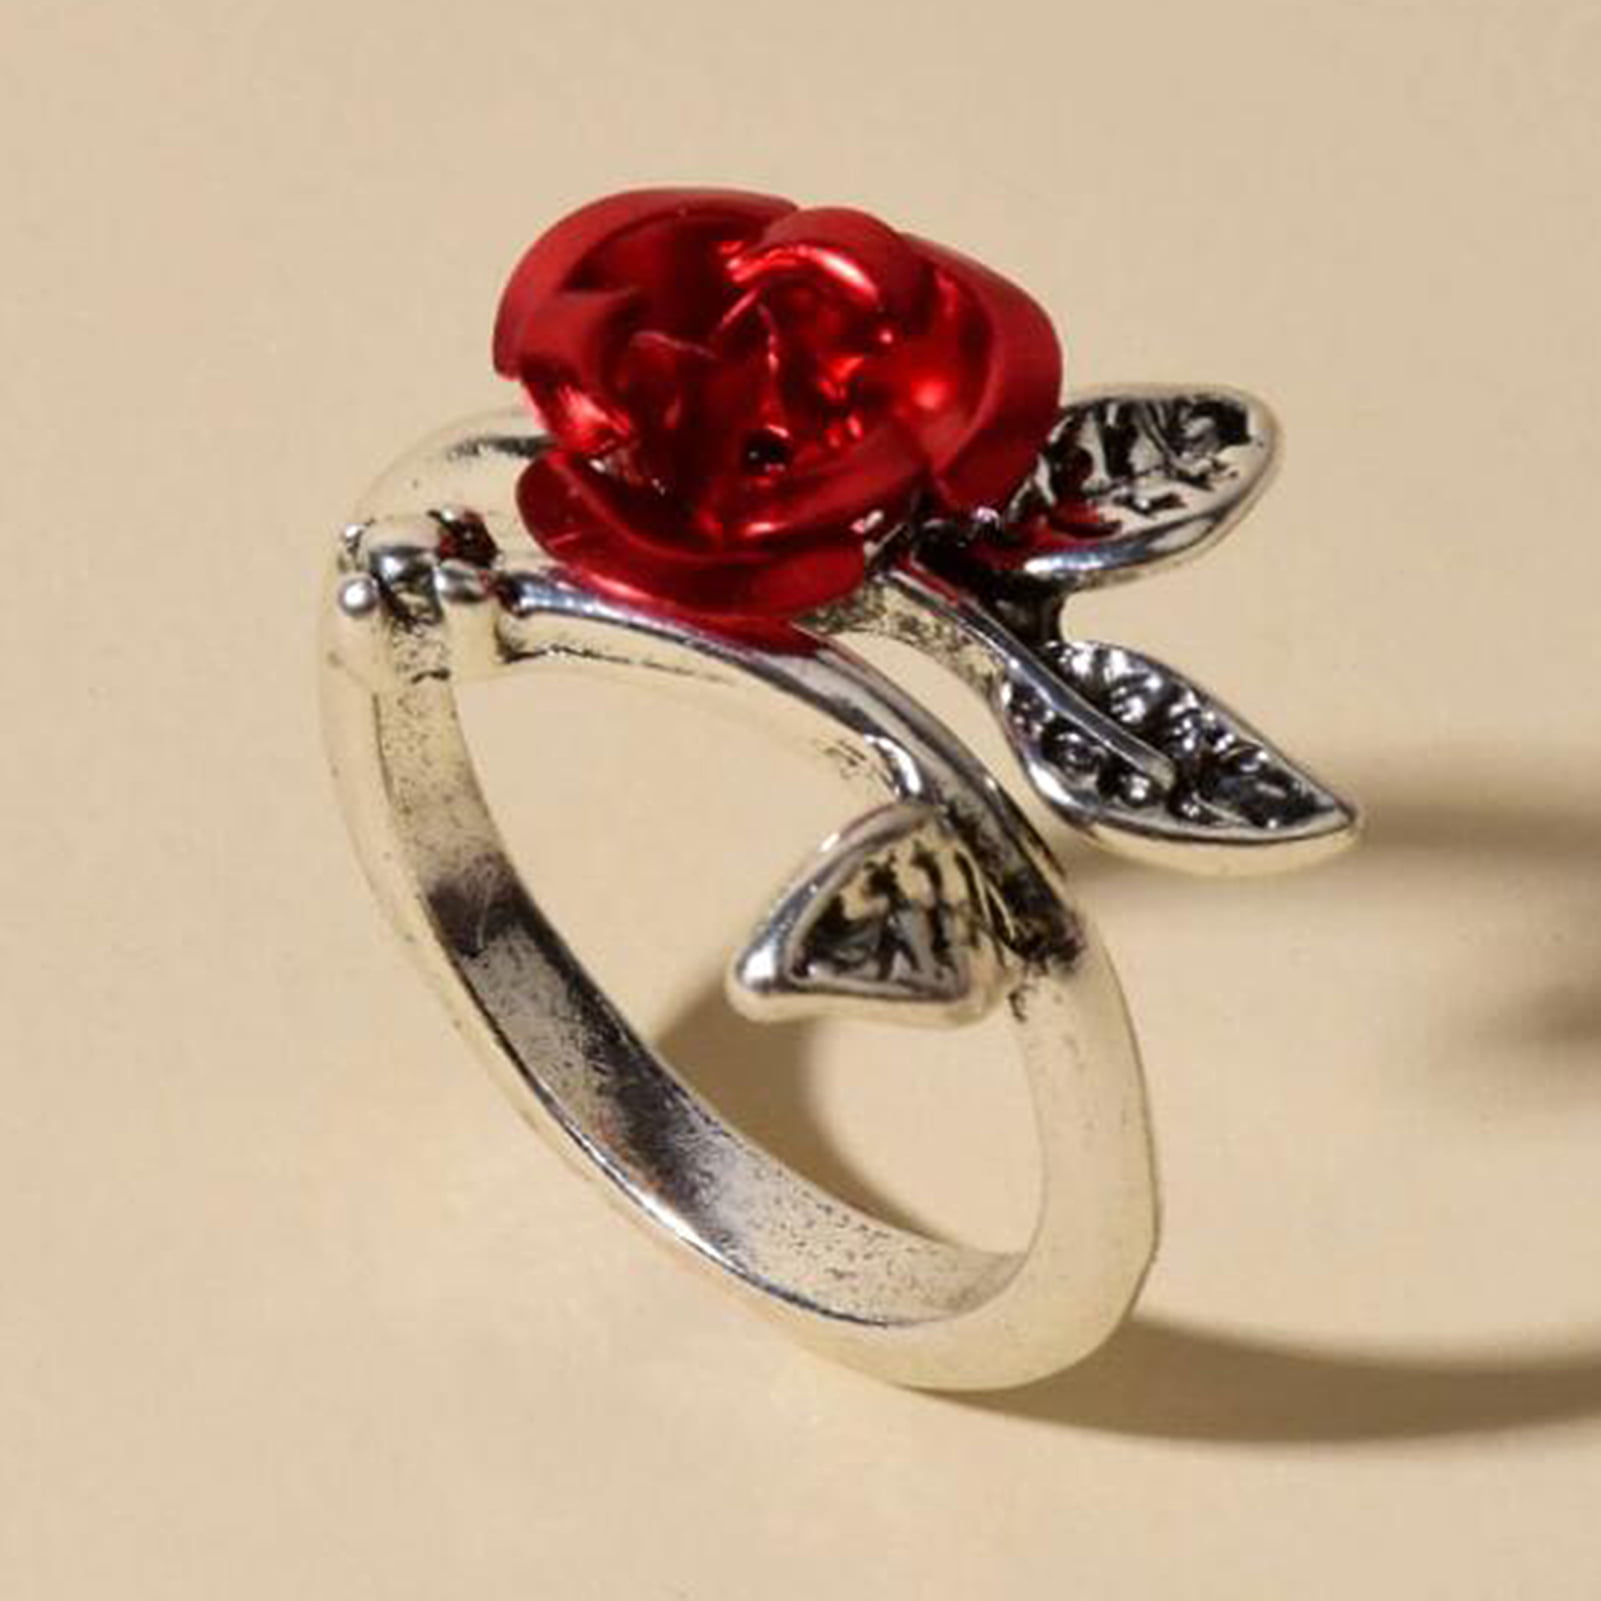 Premium Photo | Engagement ring and red rose